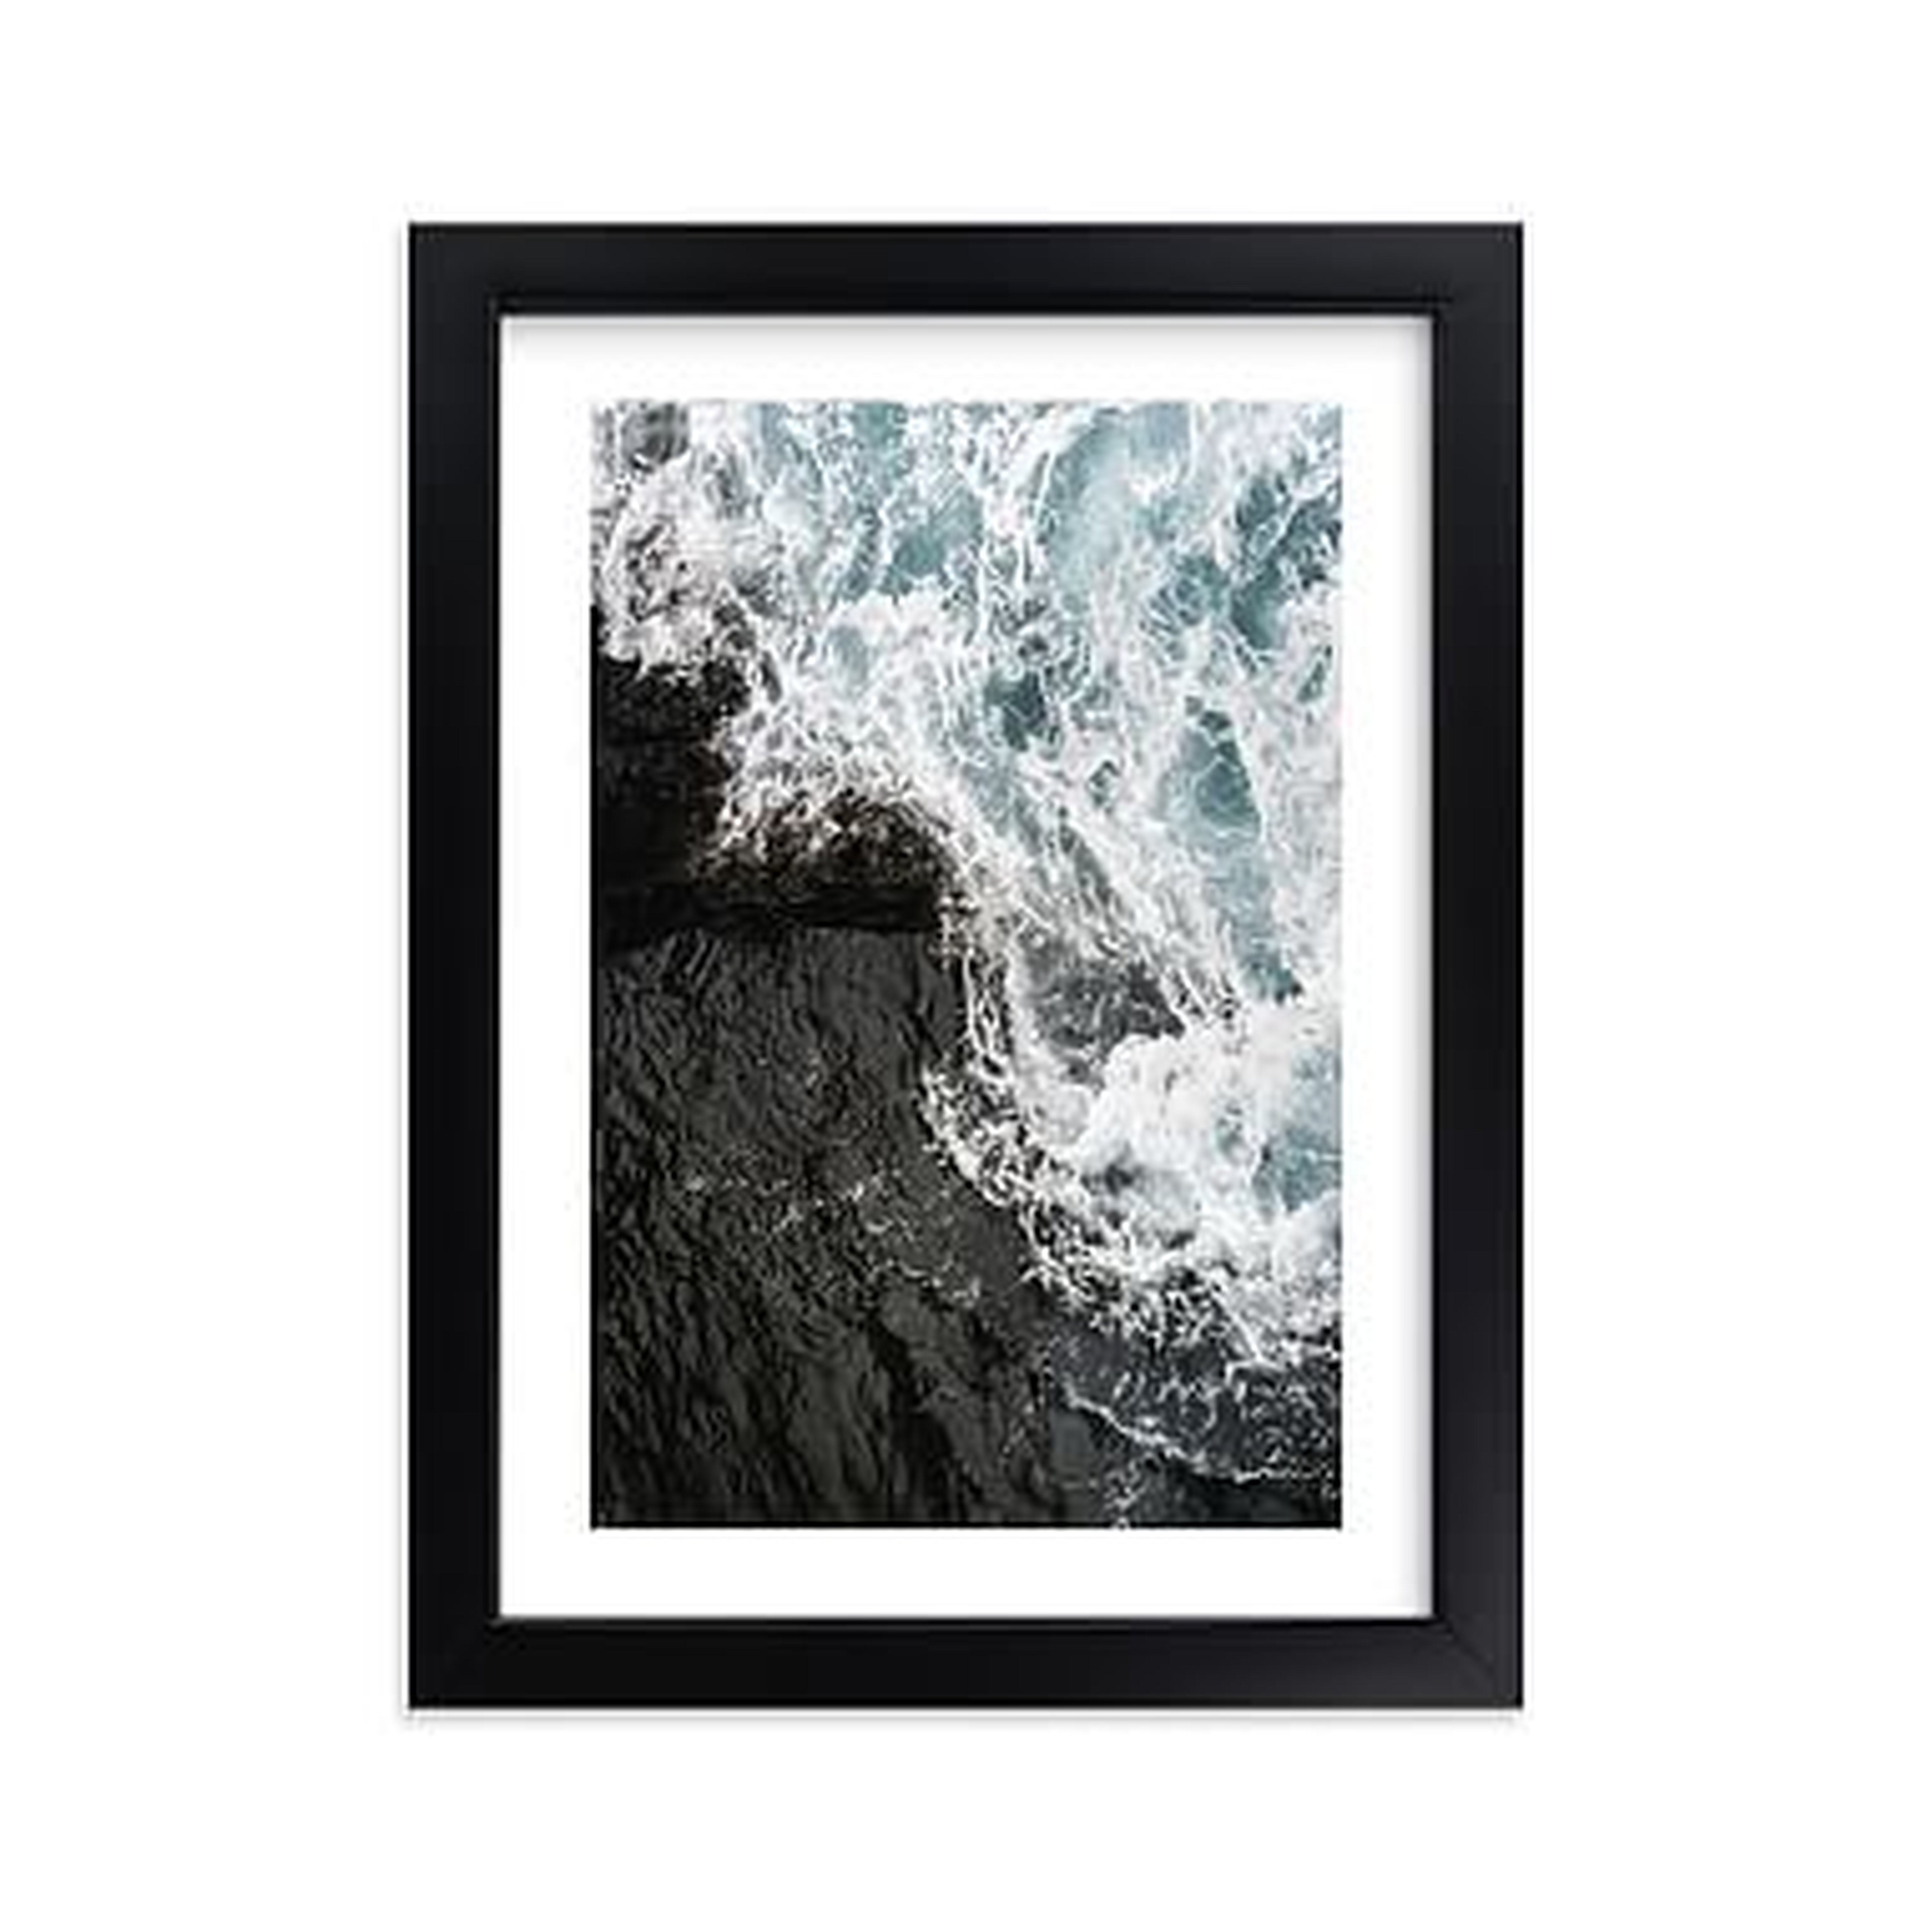 Pacific Swell Framed Art by Minted(R), 5"x7", Black - Pottery Barn Teen